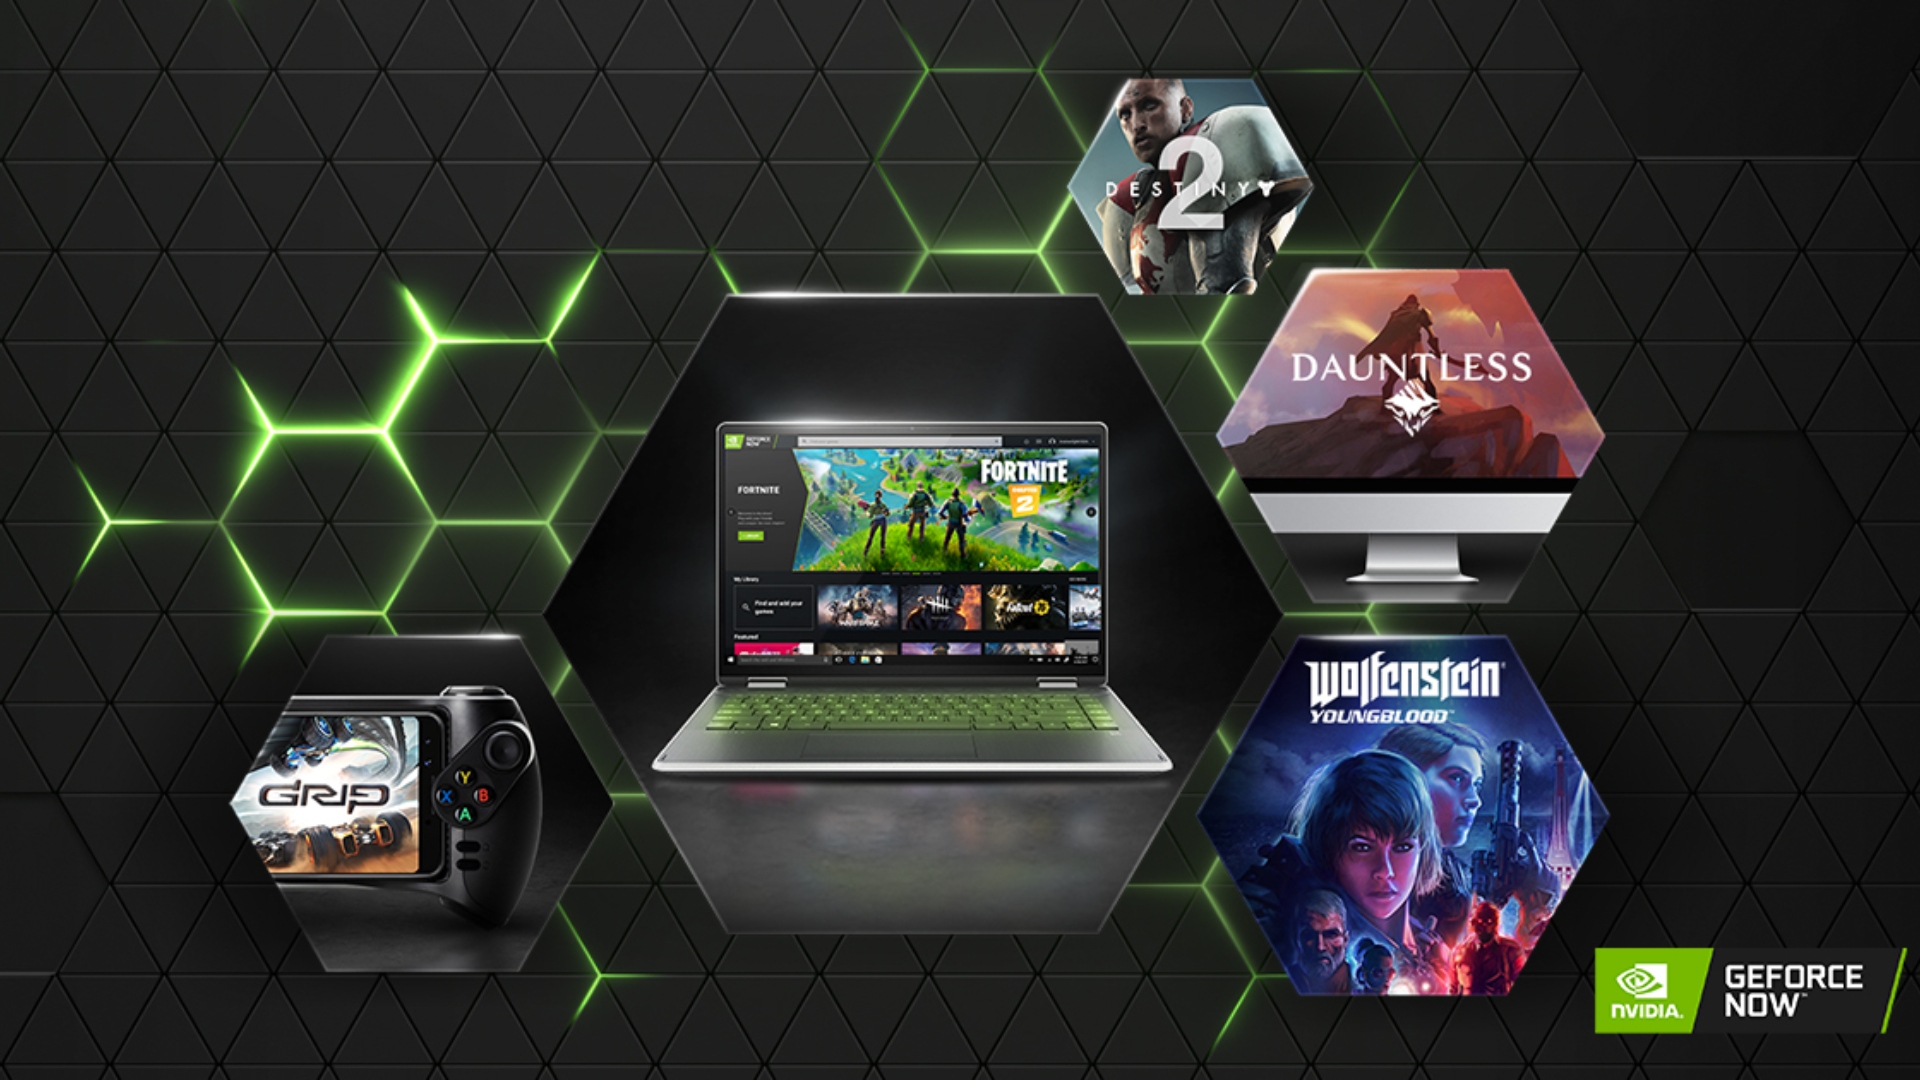 Best cloud gaming services 2023: Reviewed and ranked